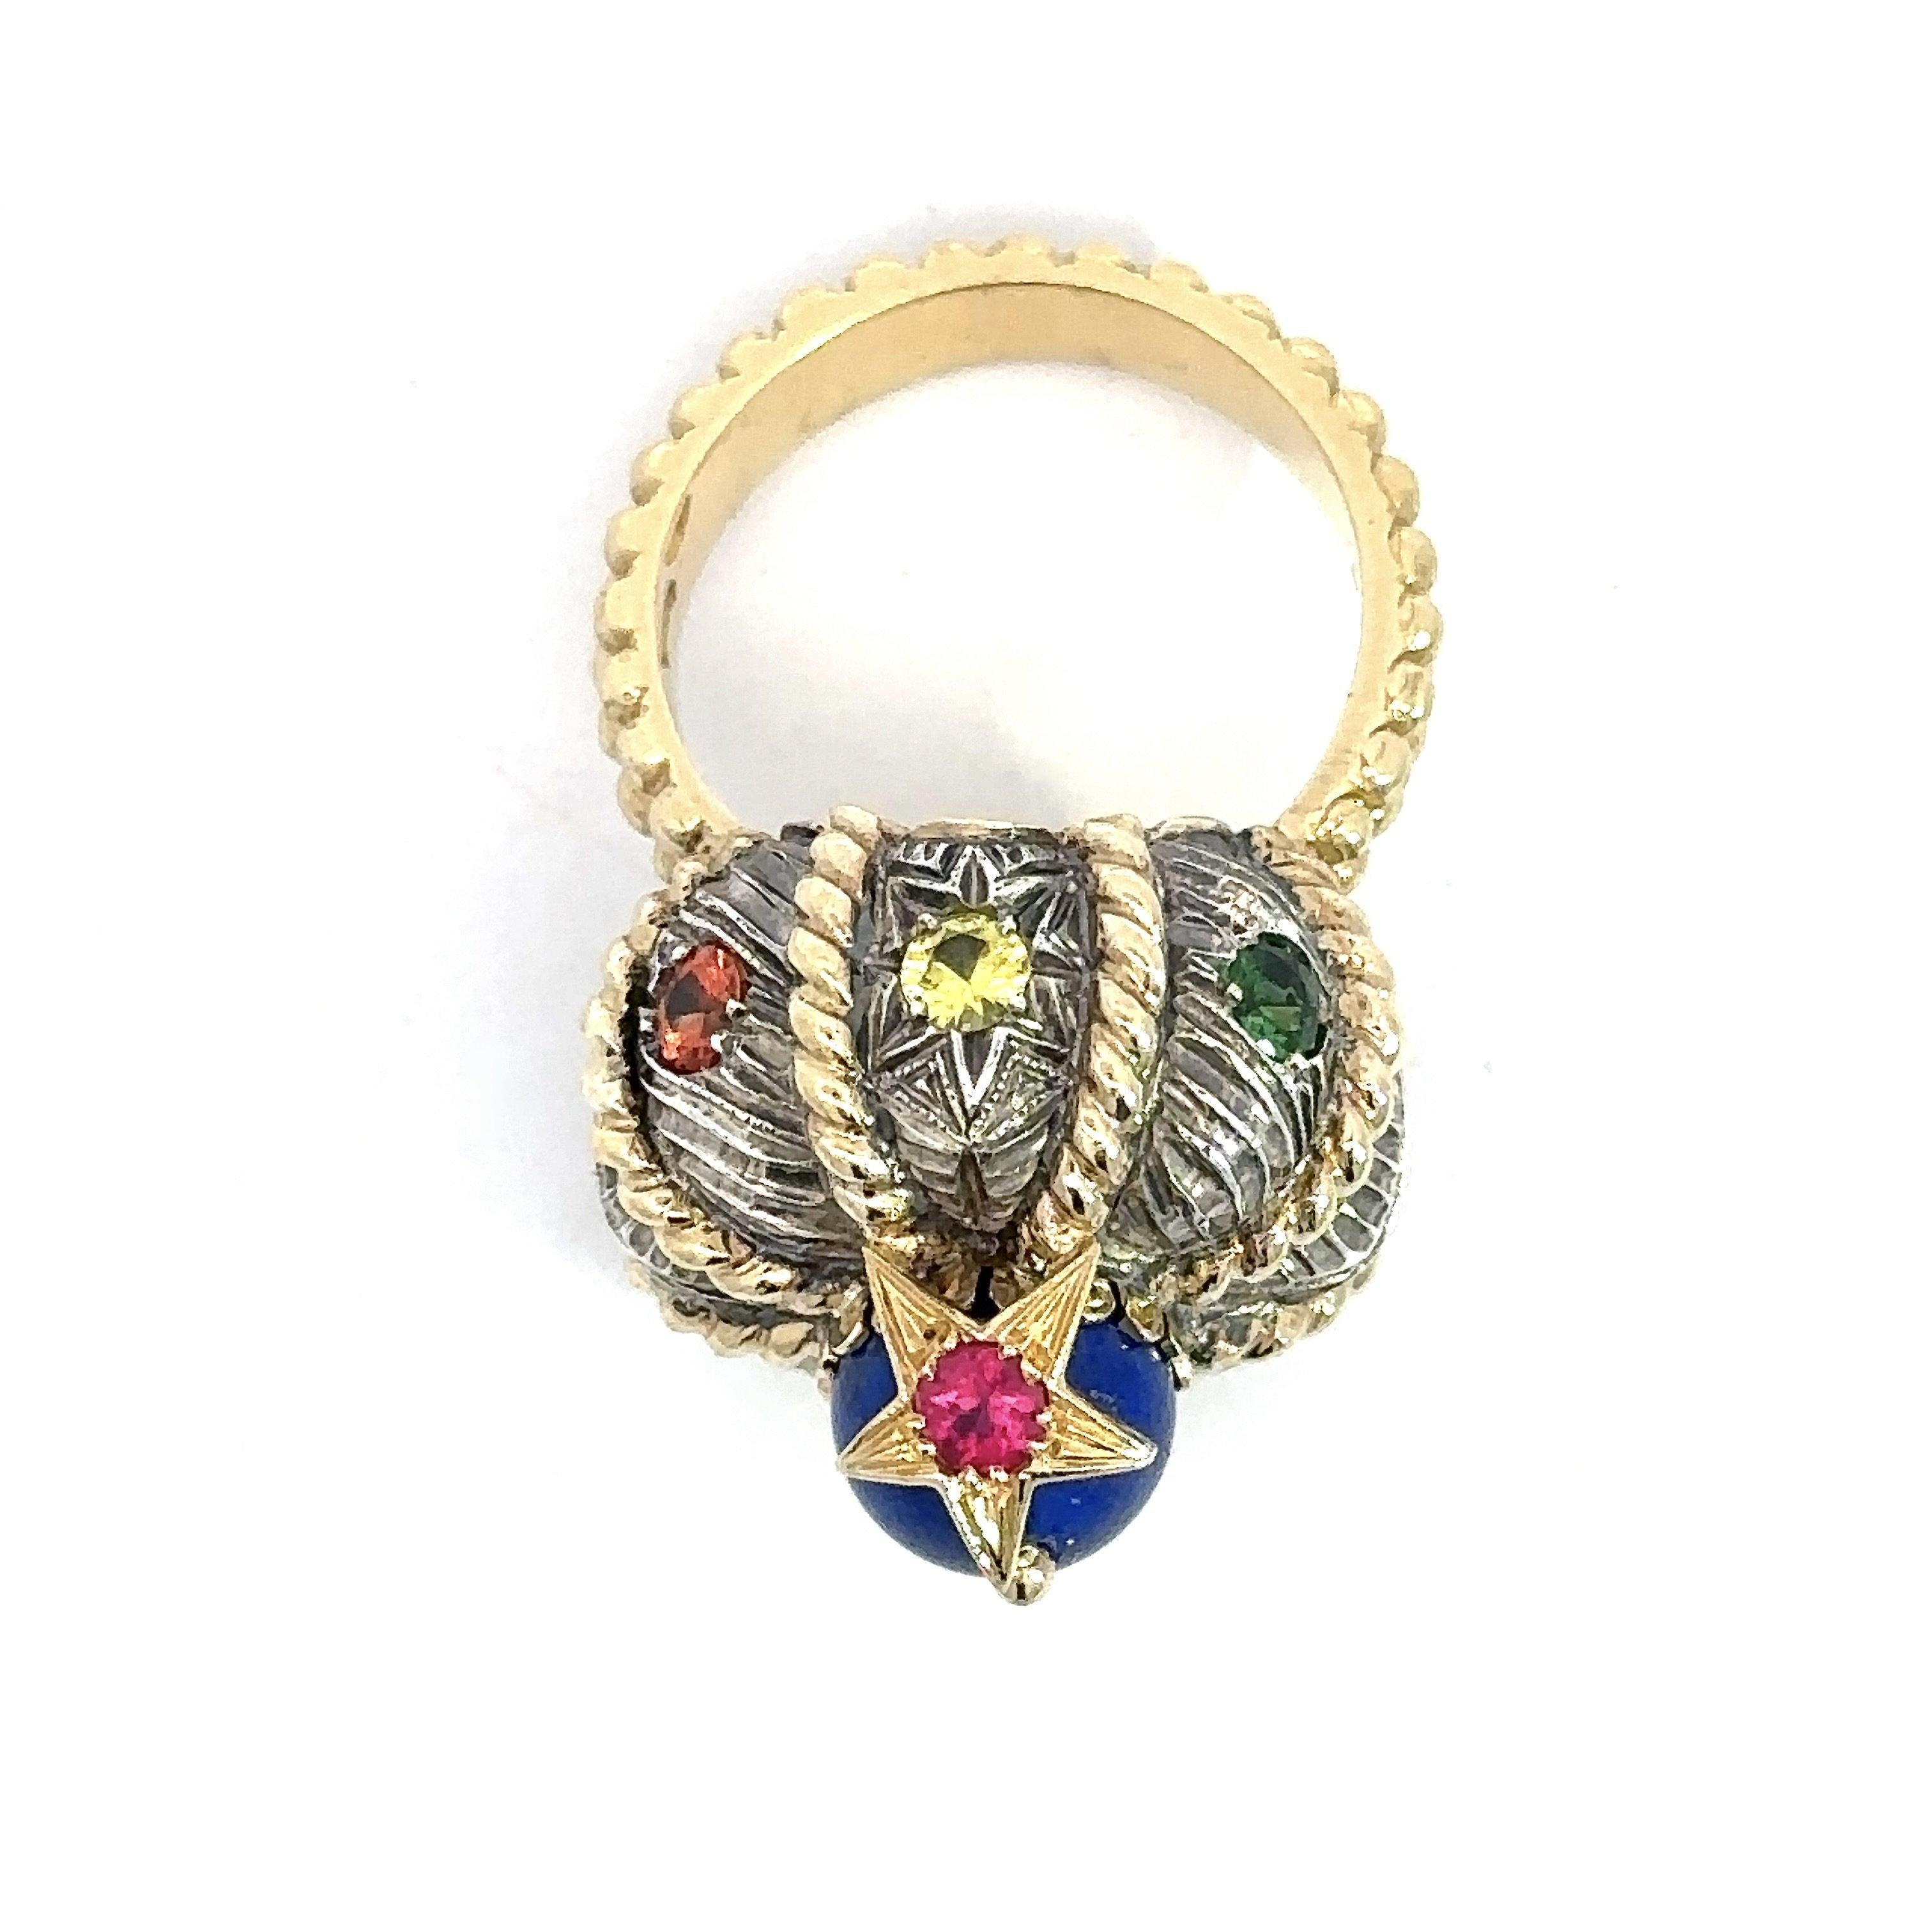 Nardi Venice Turbante Gemstone Ring, 18KT Yellow Gold and Sterling Silver For Sale 5